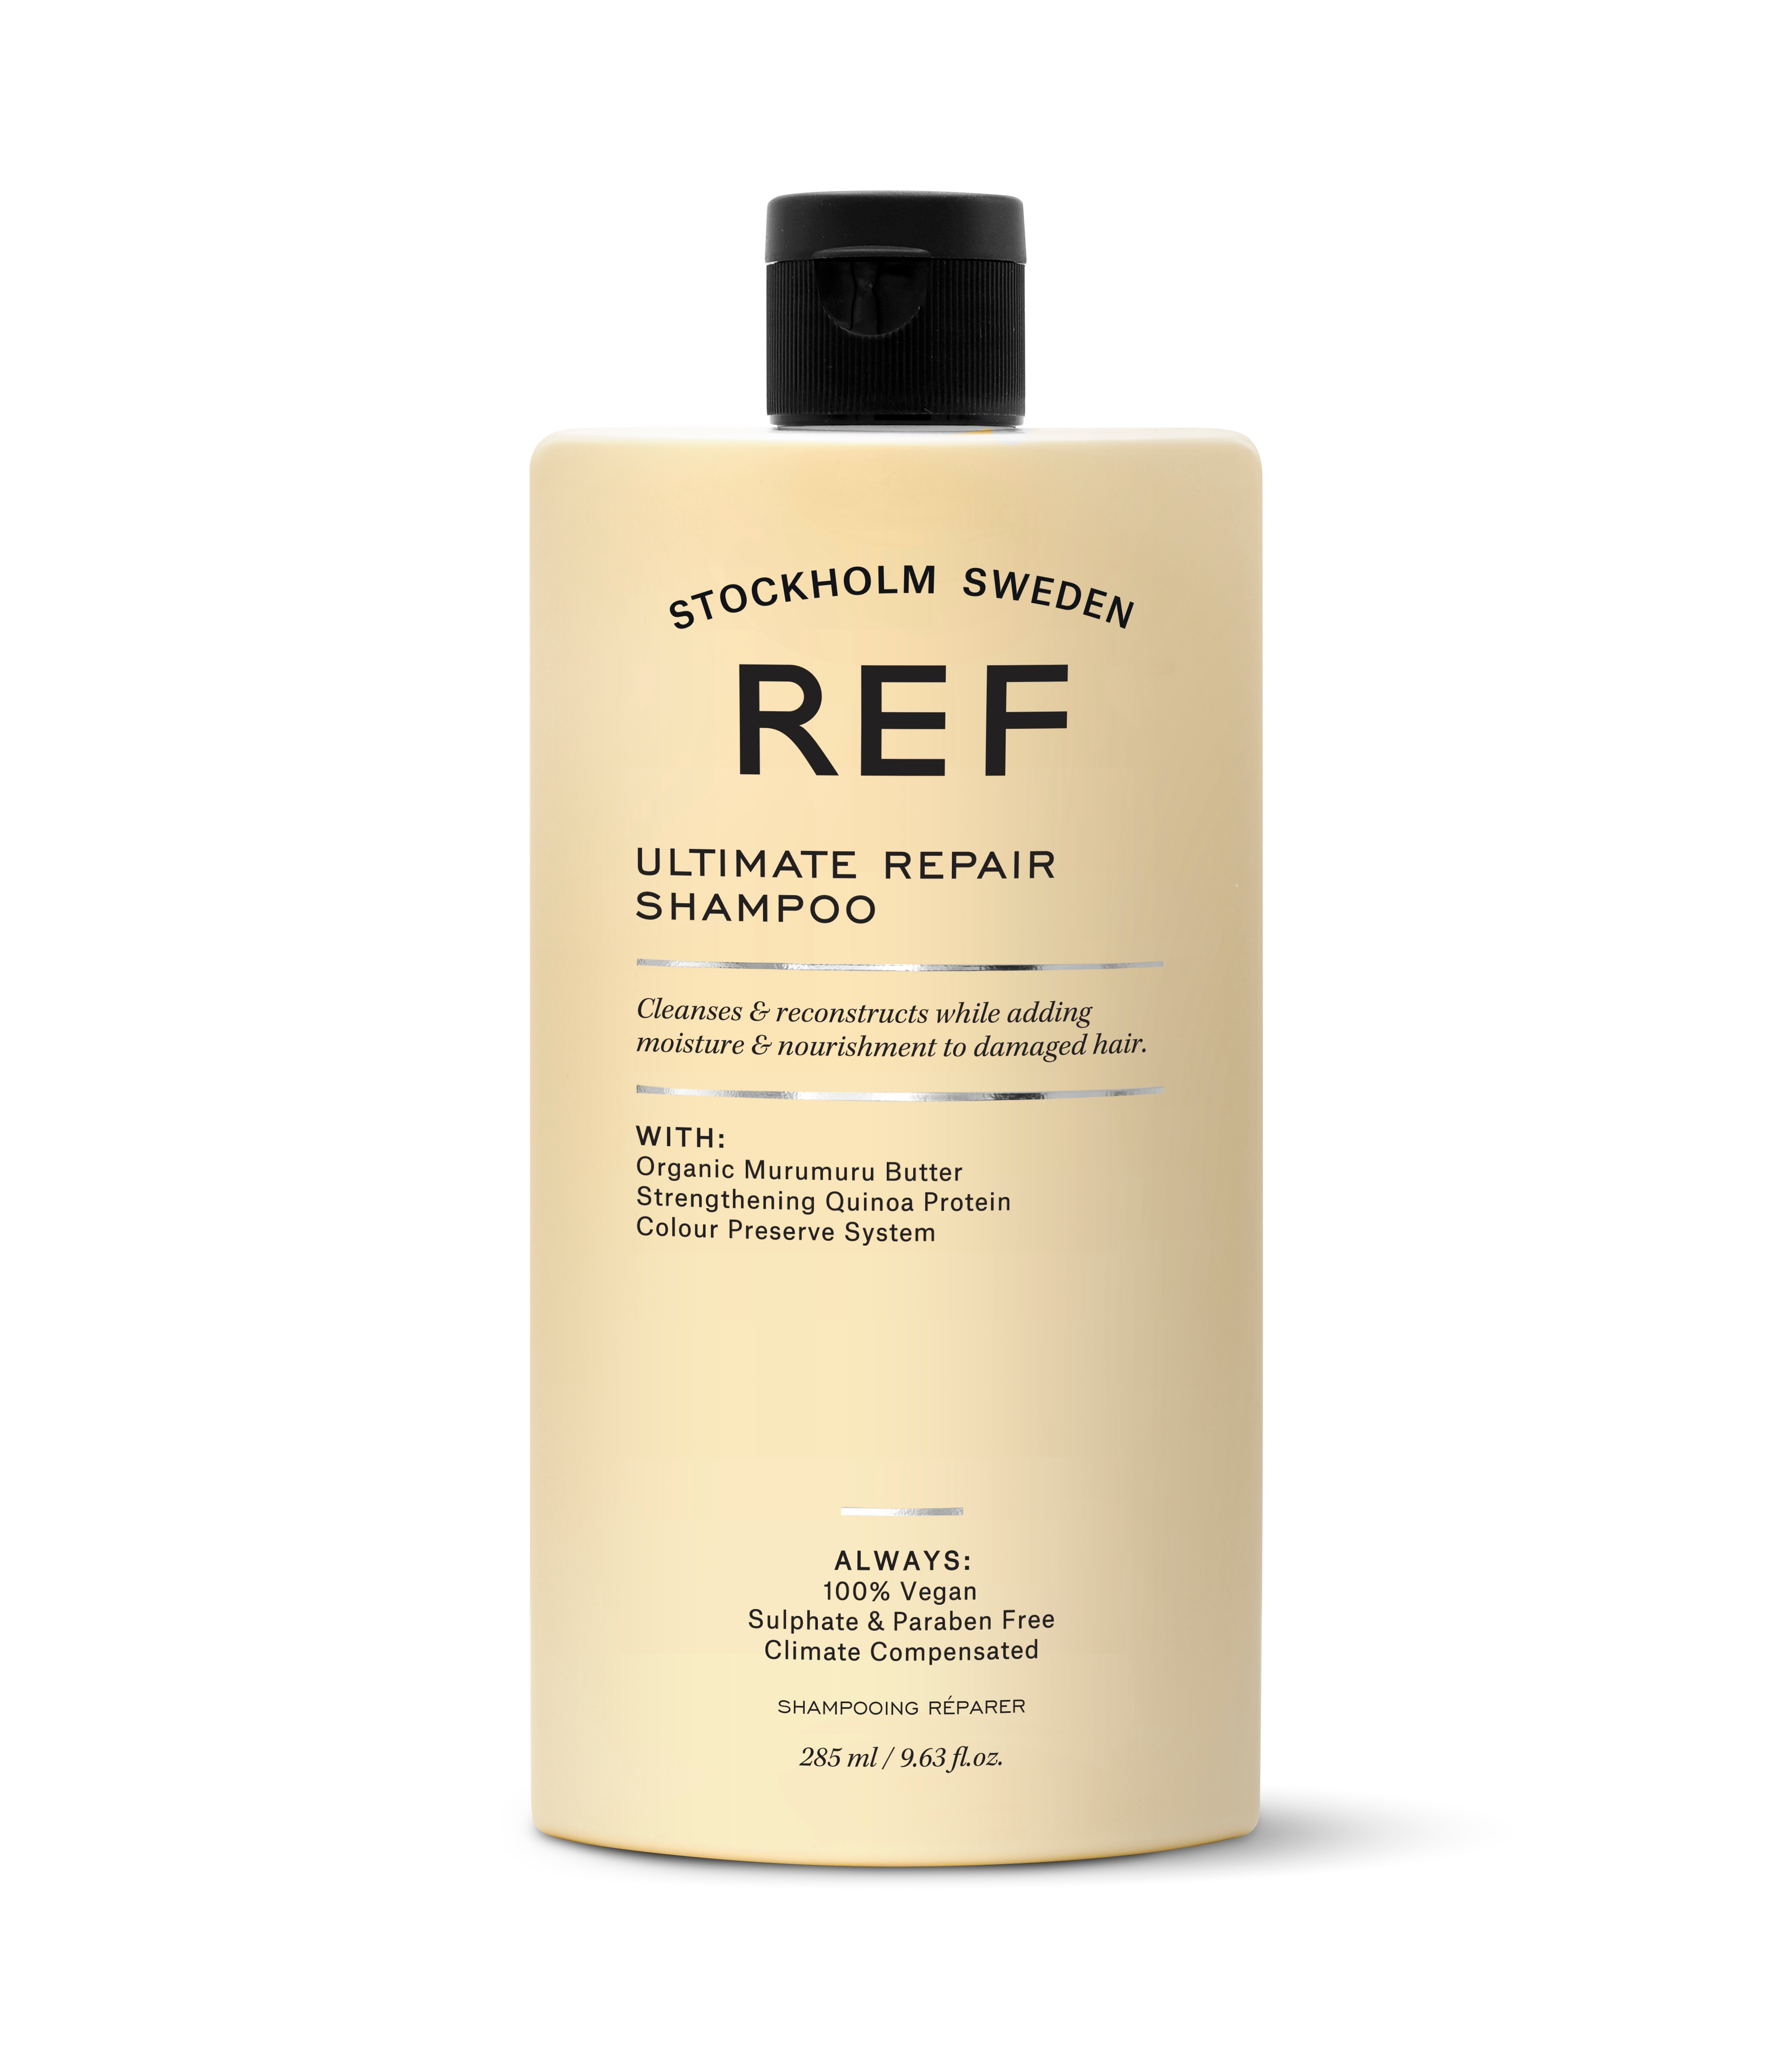 Product image from REF Shampoo - Ultimate Repair Shampoo